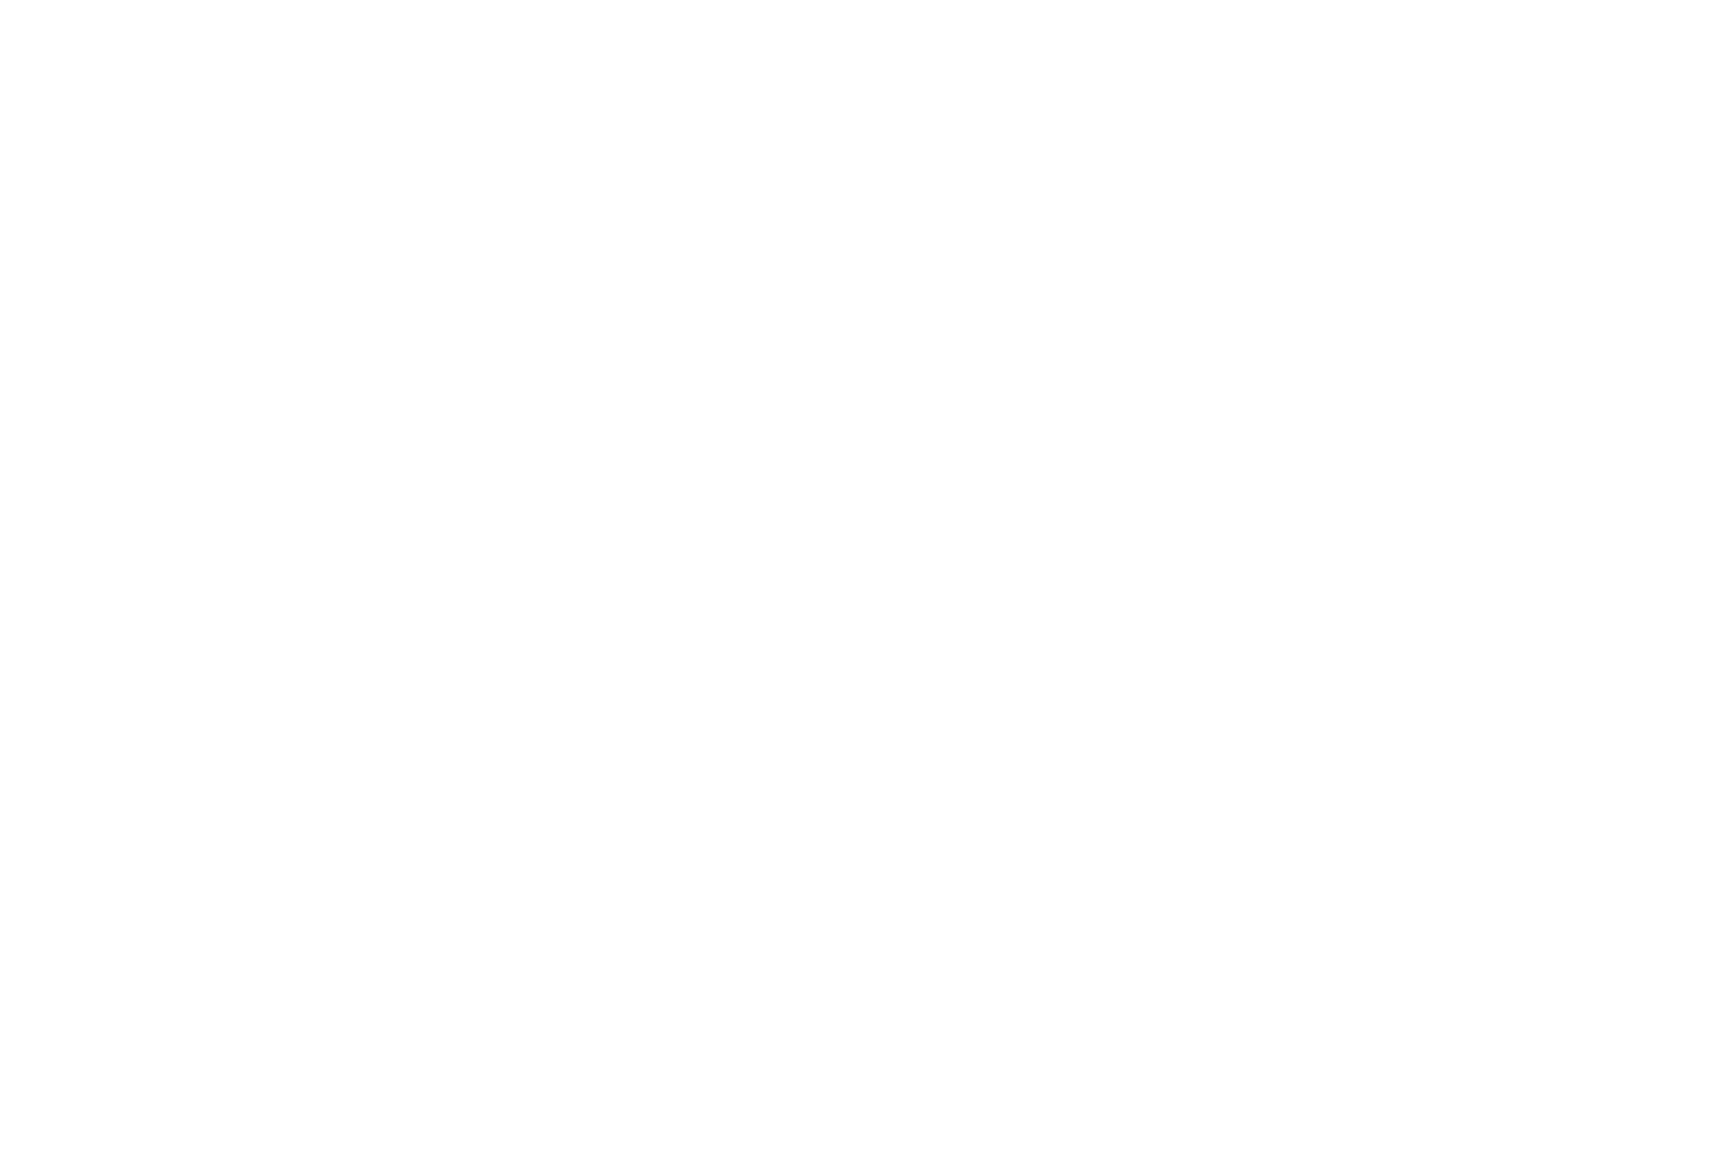 WINNER - AWARD OF EXCELLENCE - CANADA SHORTS 2016.png